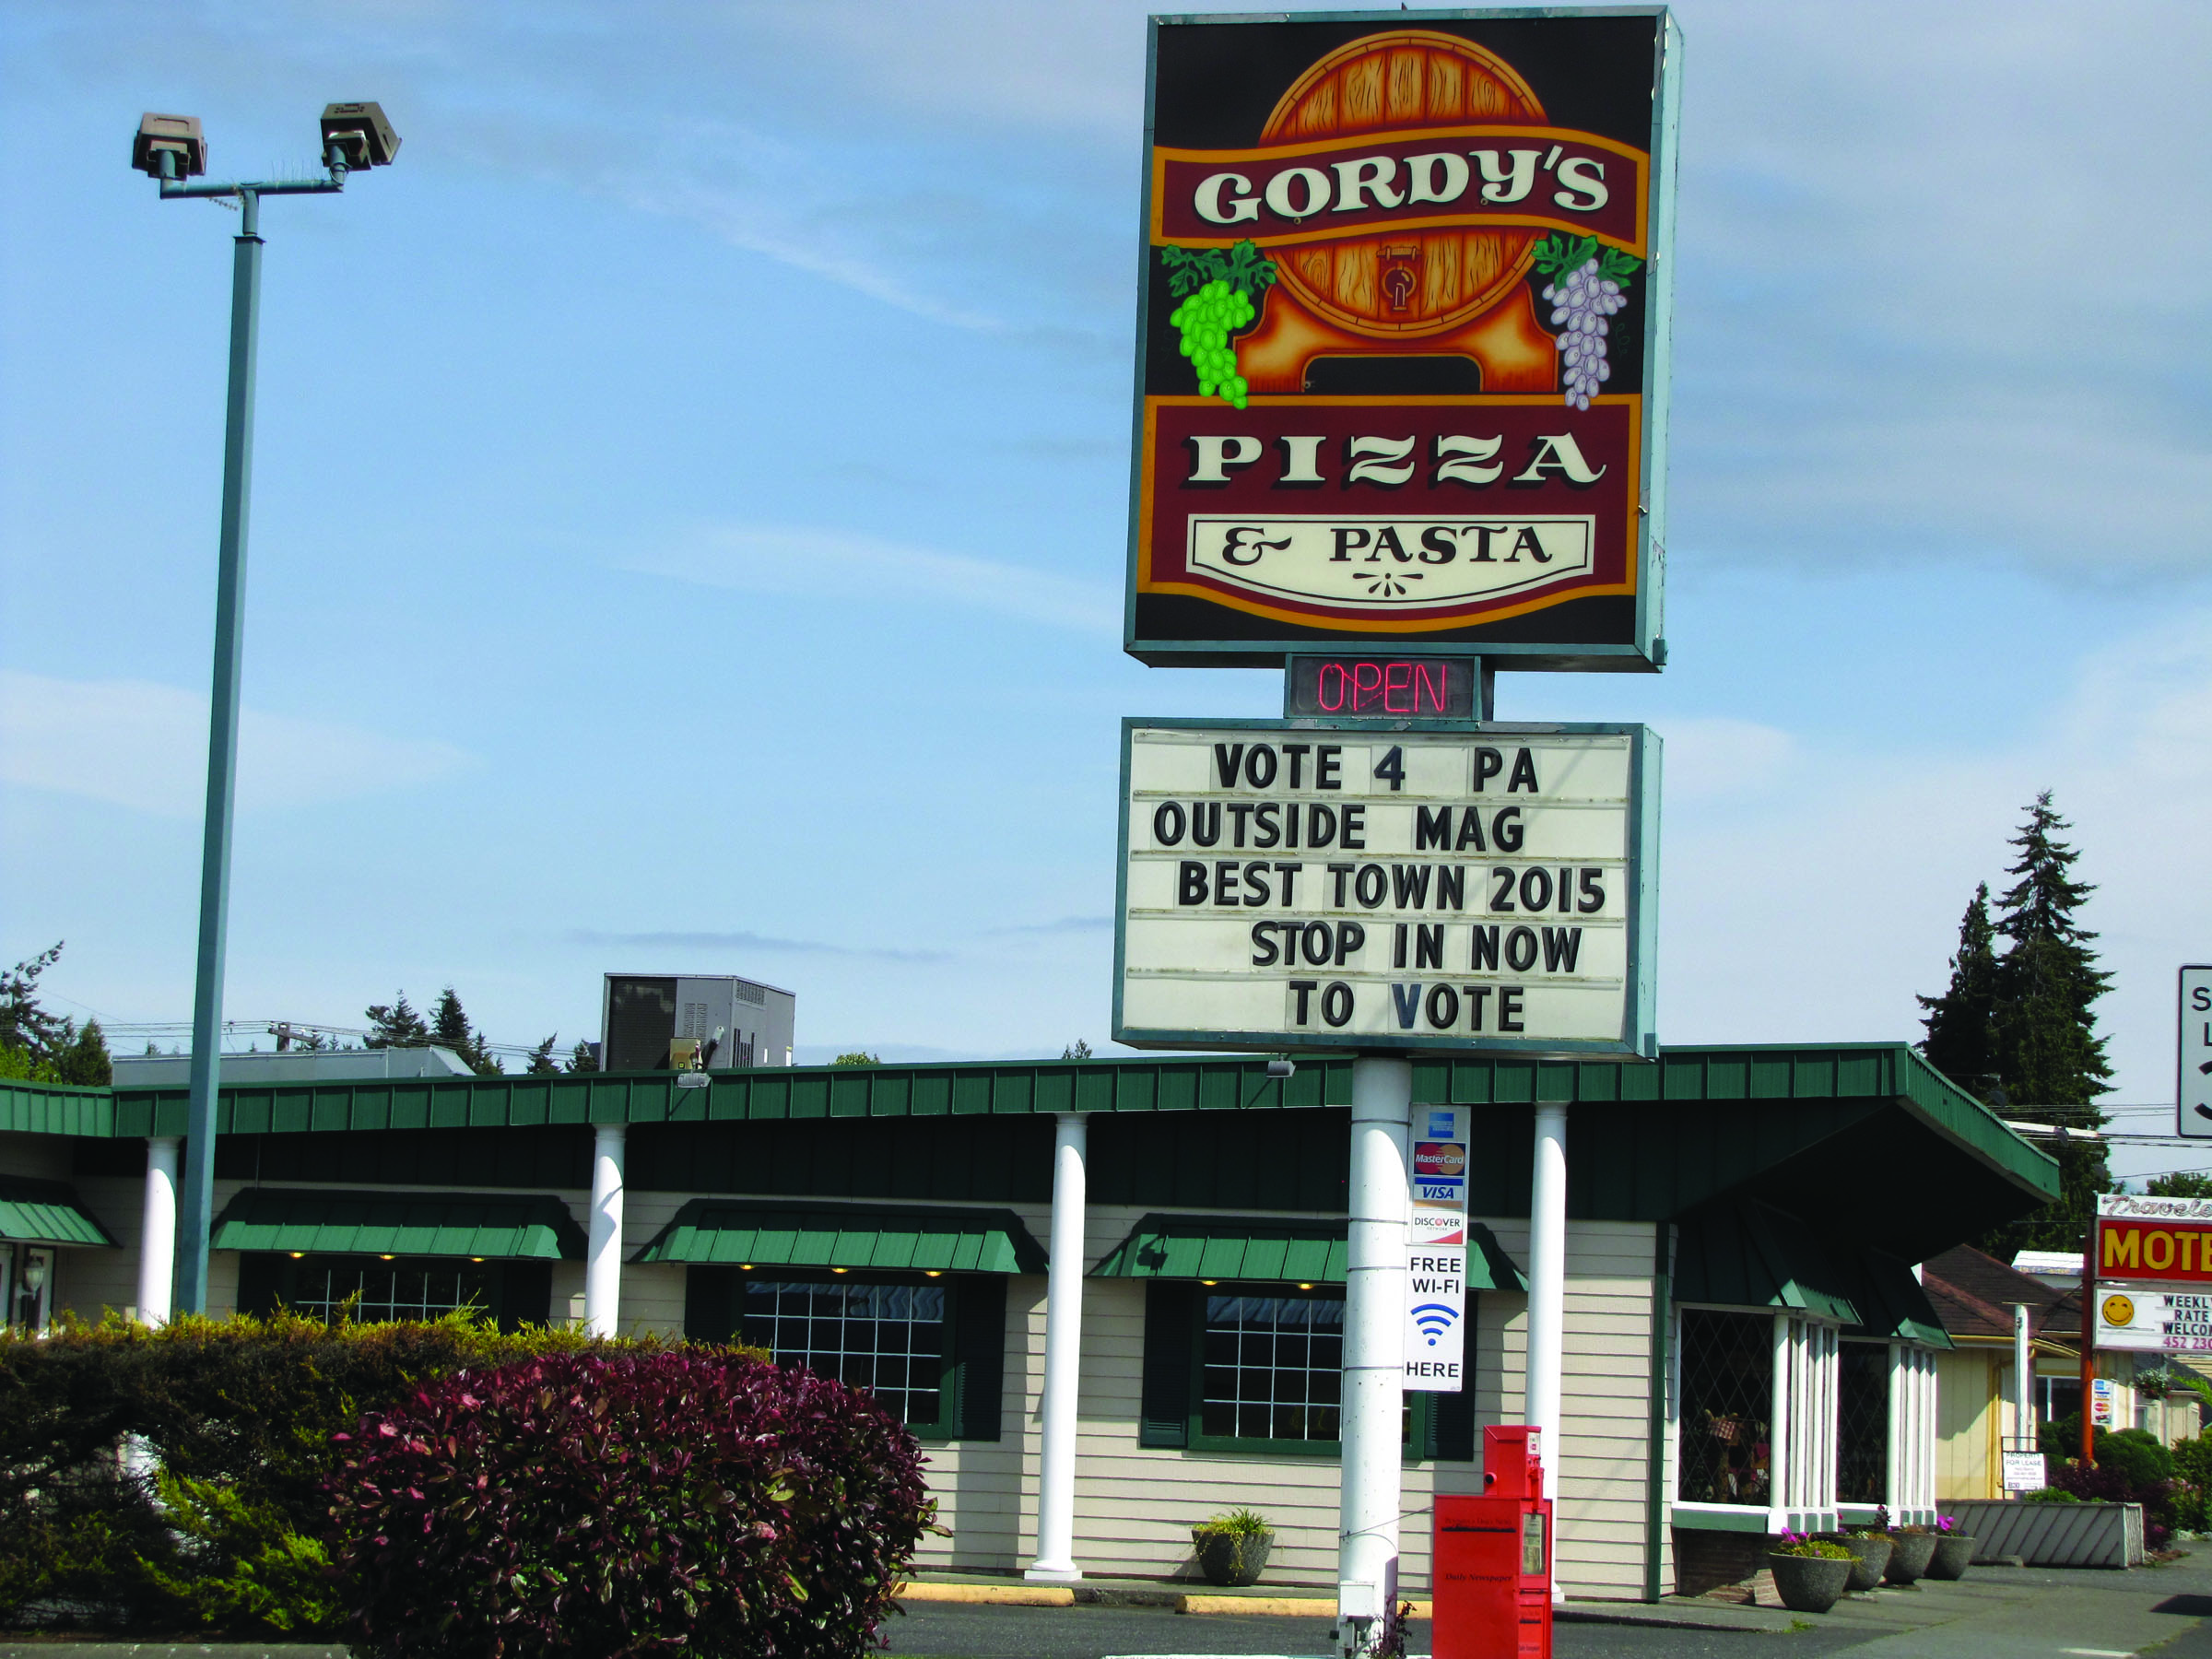 Businesses throughout Port Angeles are supporting the “Vote PA!” effort with their signboards. This one is at Gordy's Pizza and Pasta. (Arwyn Rice/Peninsula Daily News)